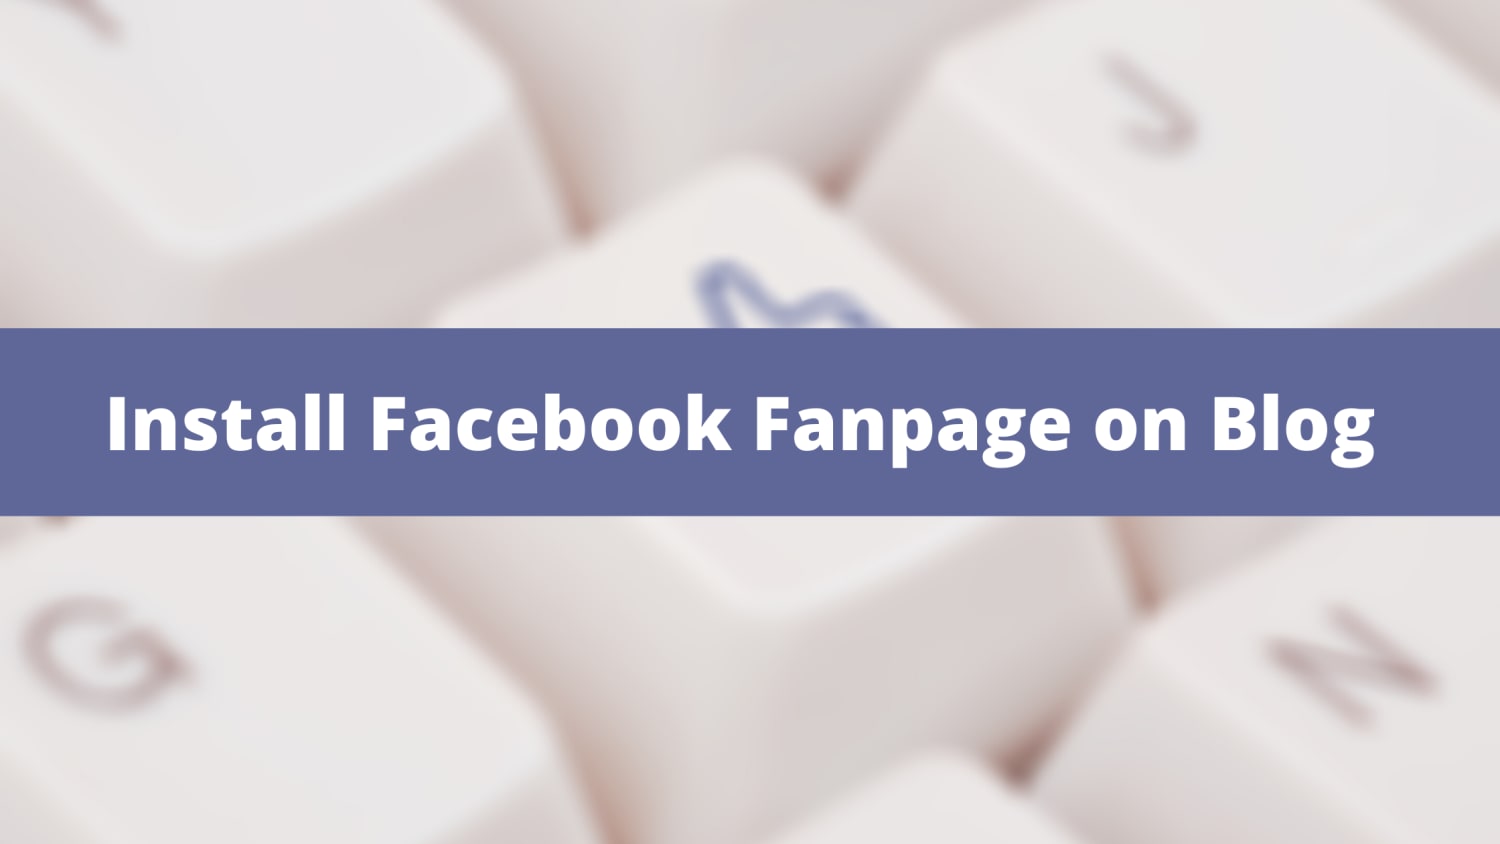 Install Facebook Fanpage on Blog